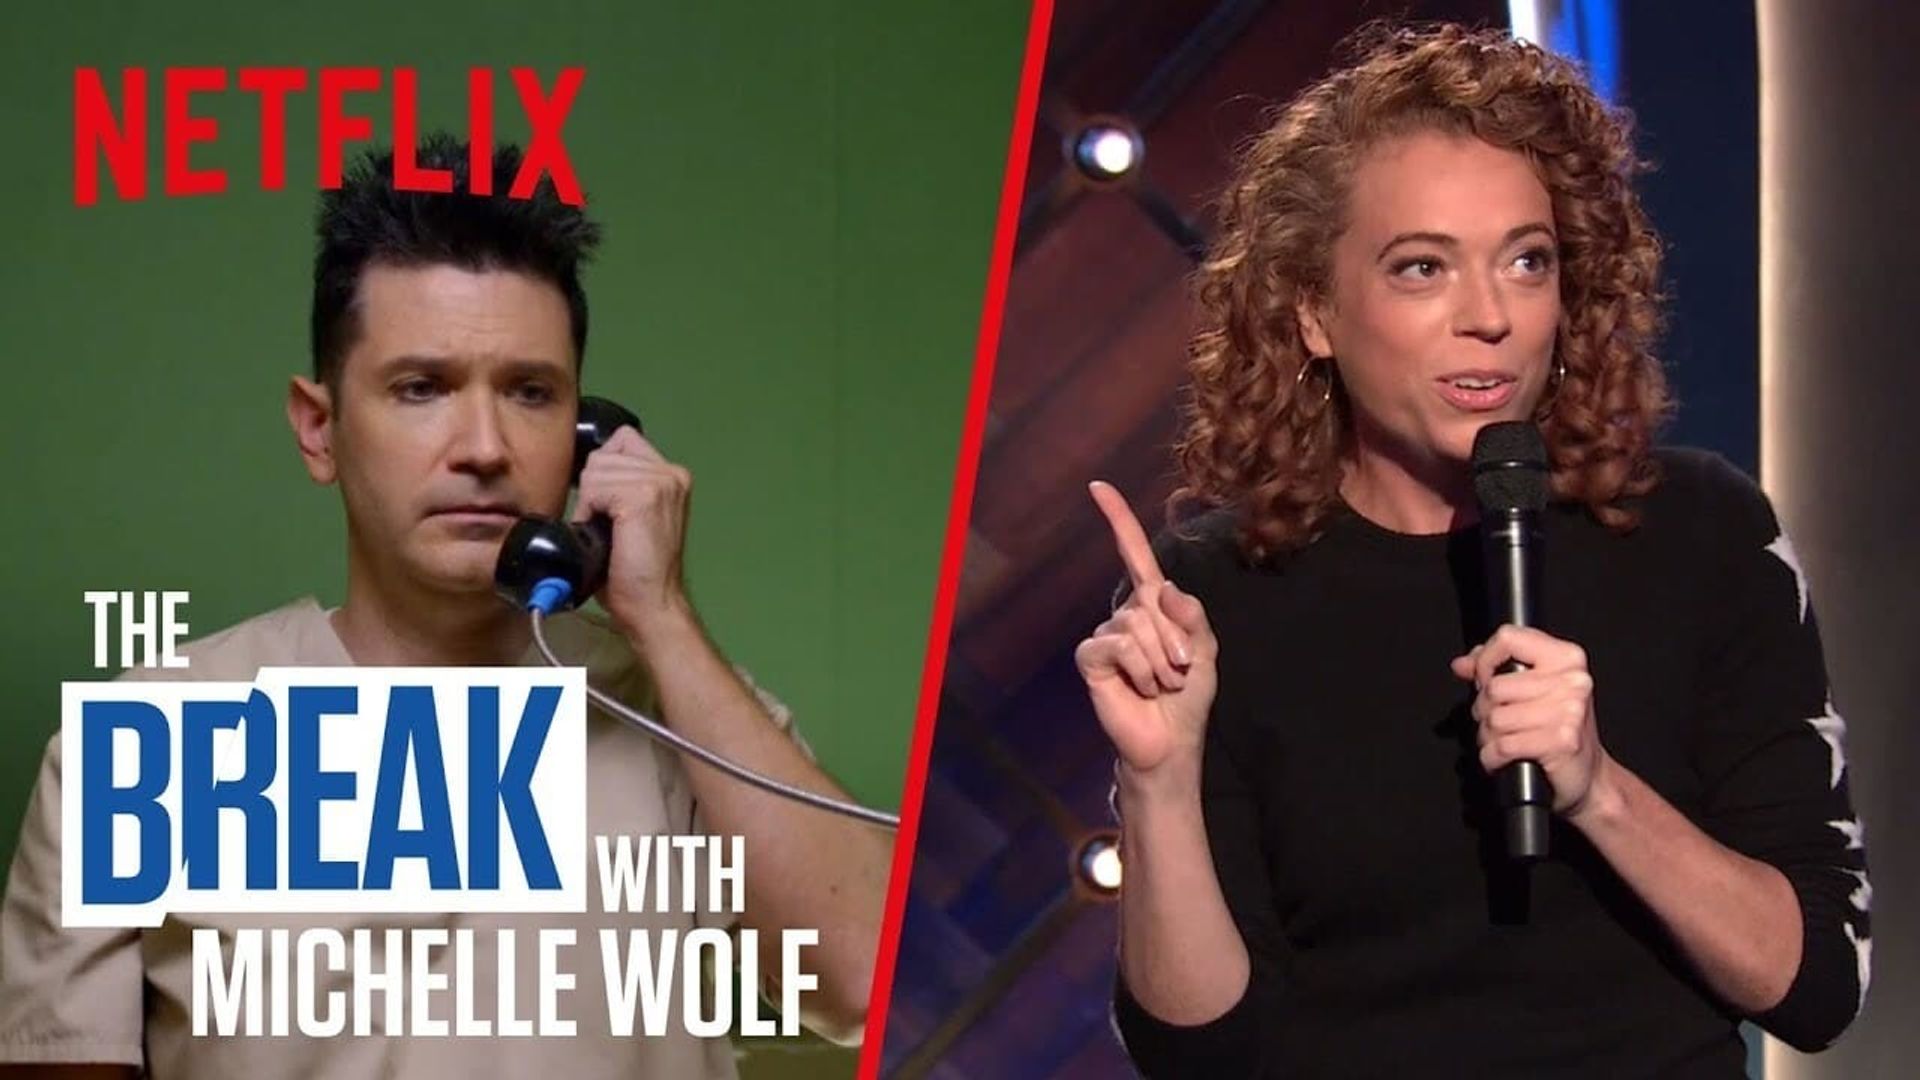 The Break with Michelle Wolf background